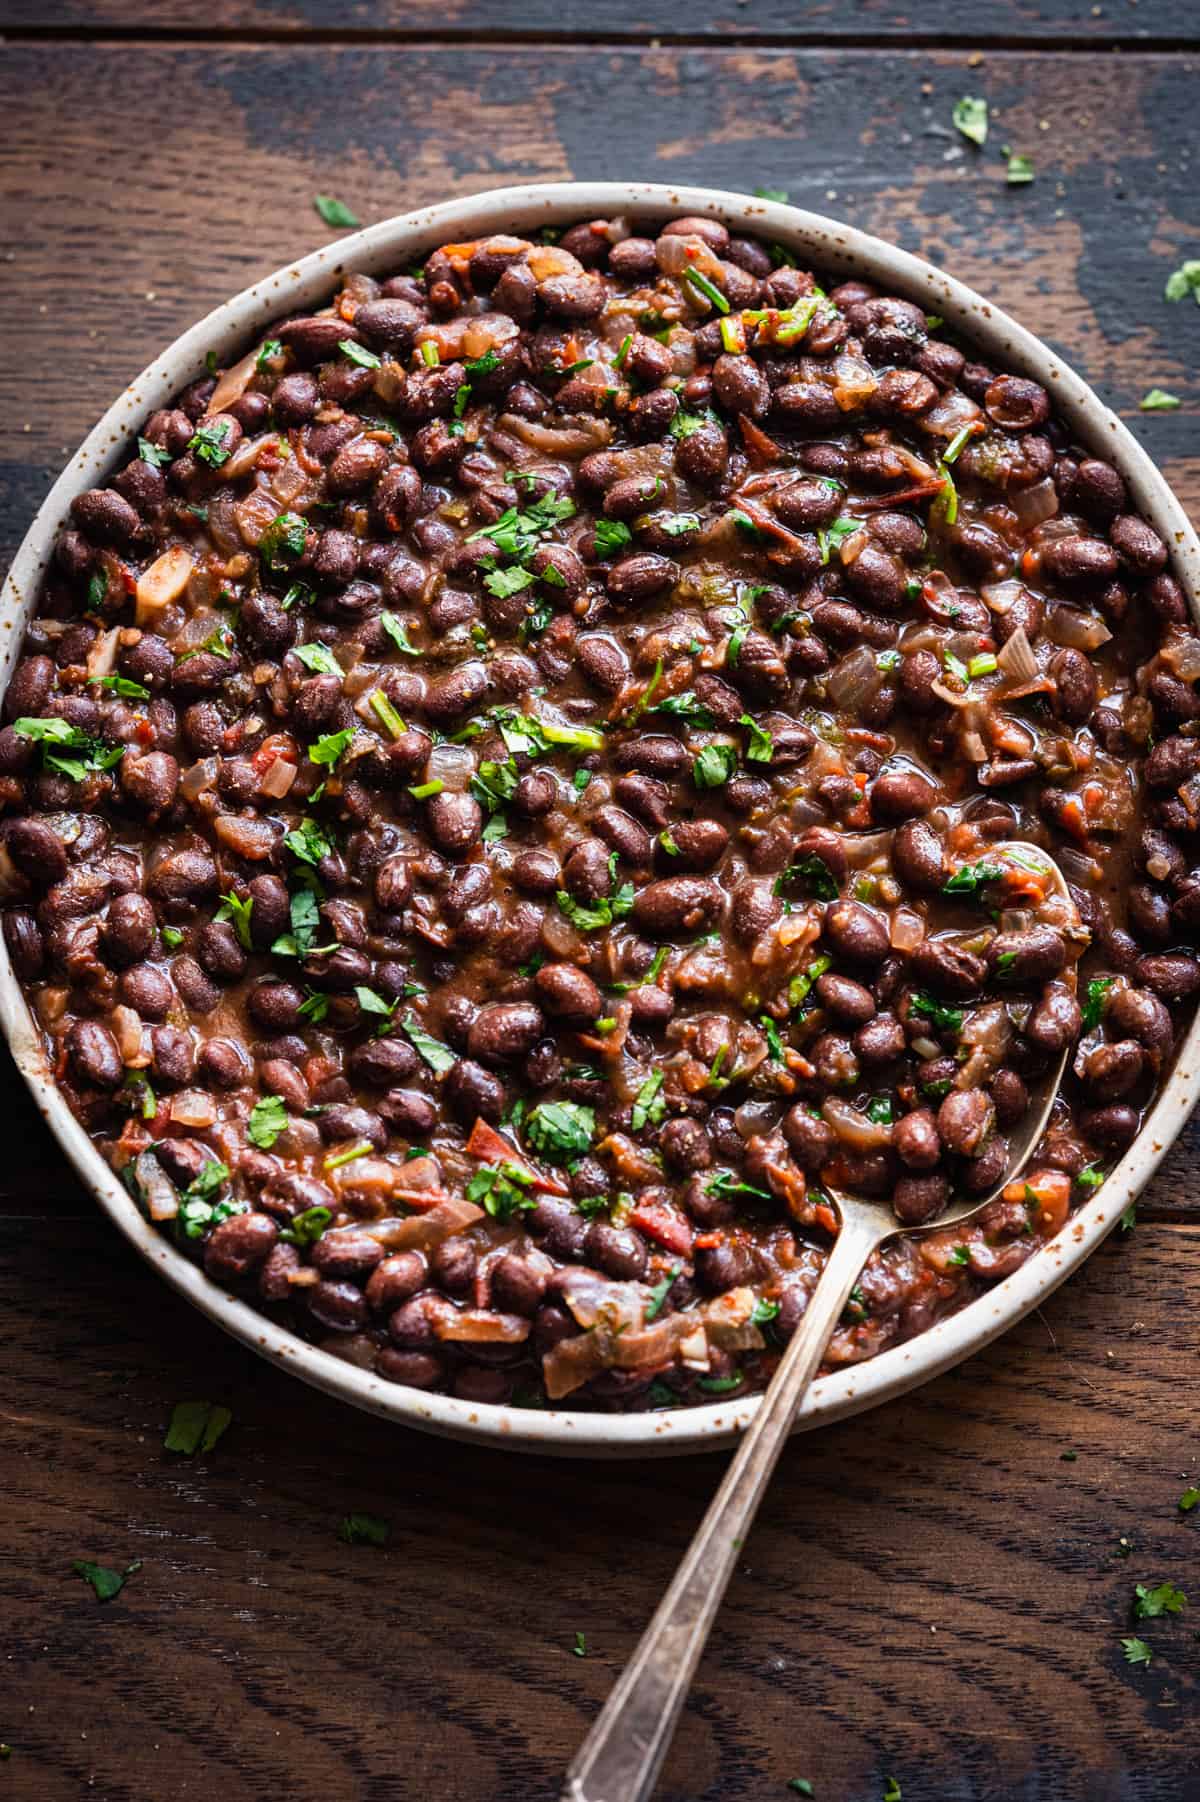 https://rainbowplantlife.com/wp-content/uploads/2022/09/Mexican-Black-Beans-cover-photo-1-of-1.jpg